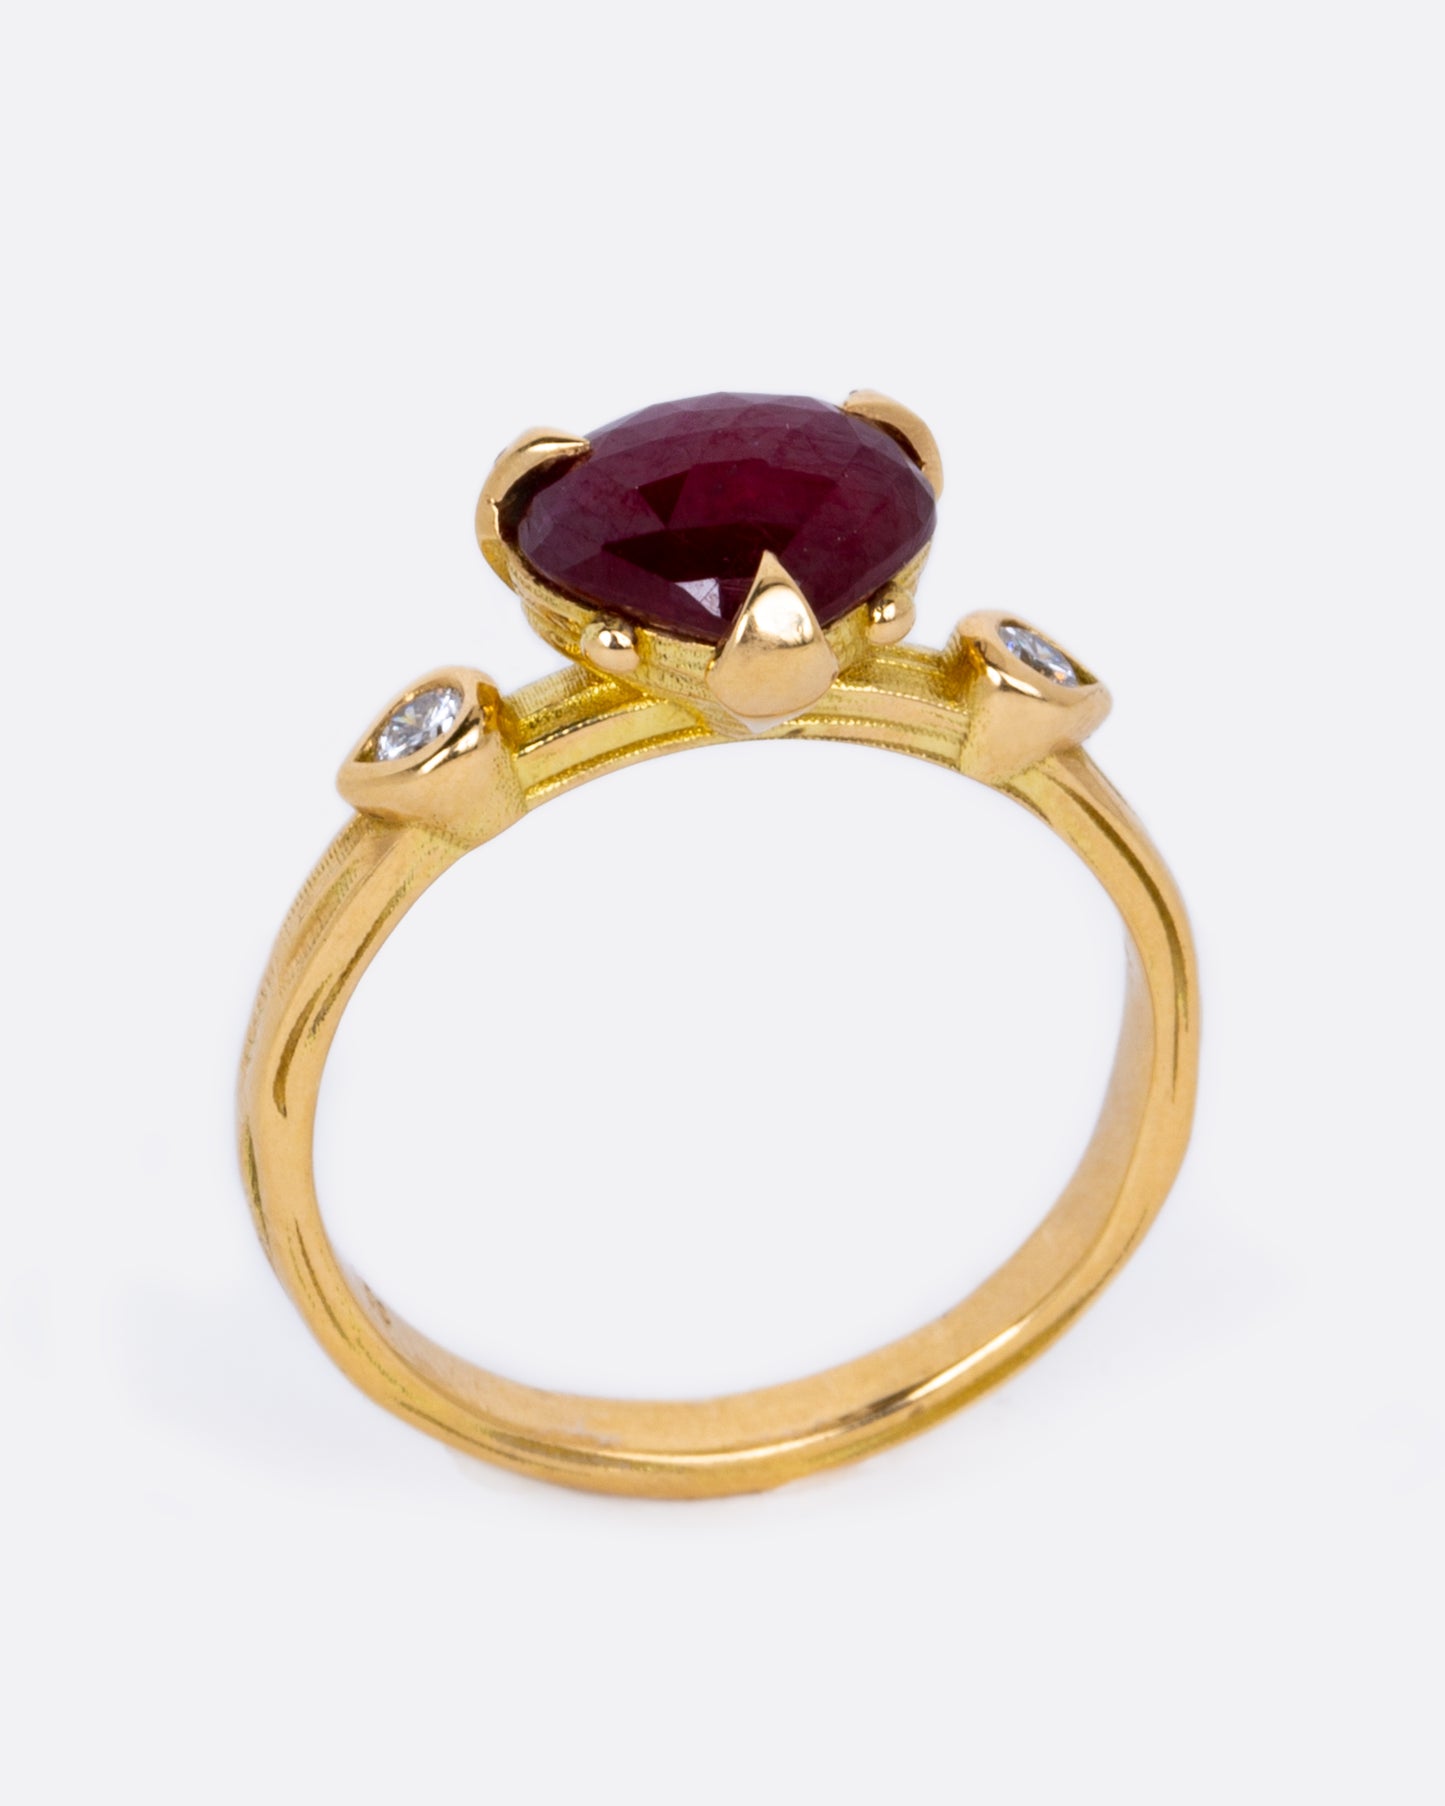 A deep red, rose cut ruby heart flanked by two white diamonds.